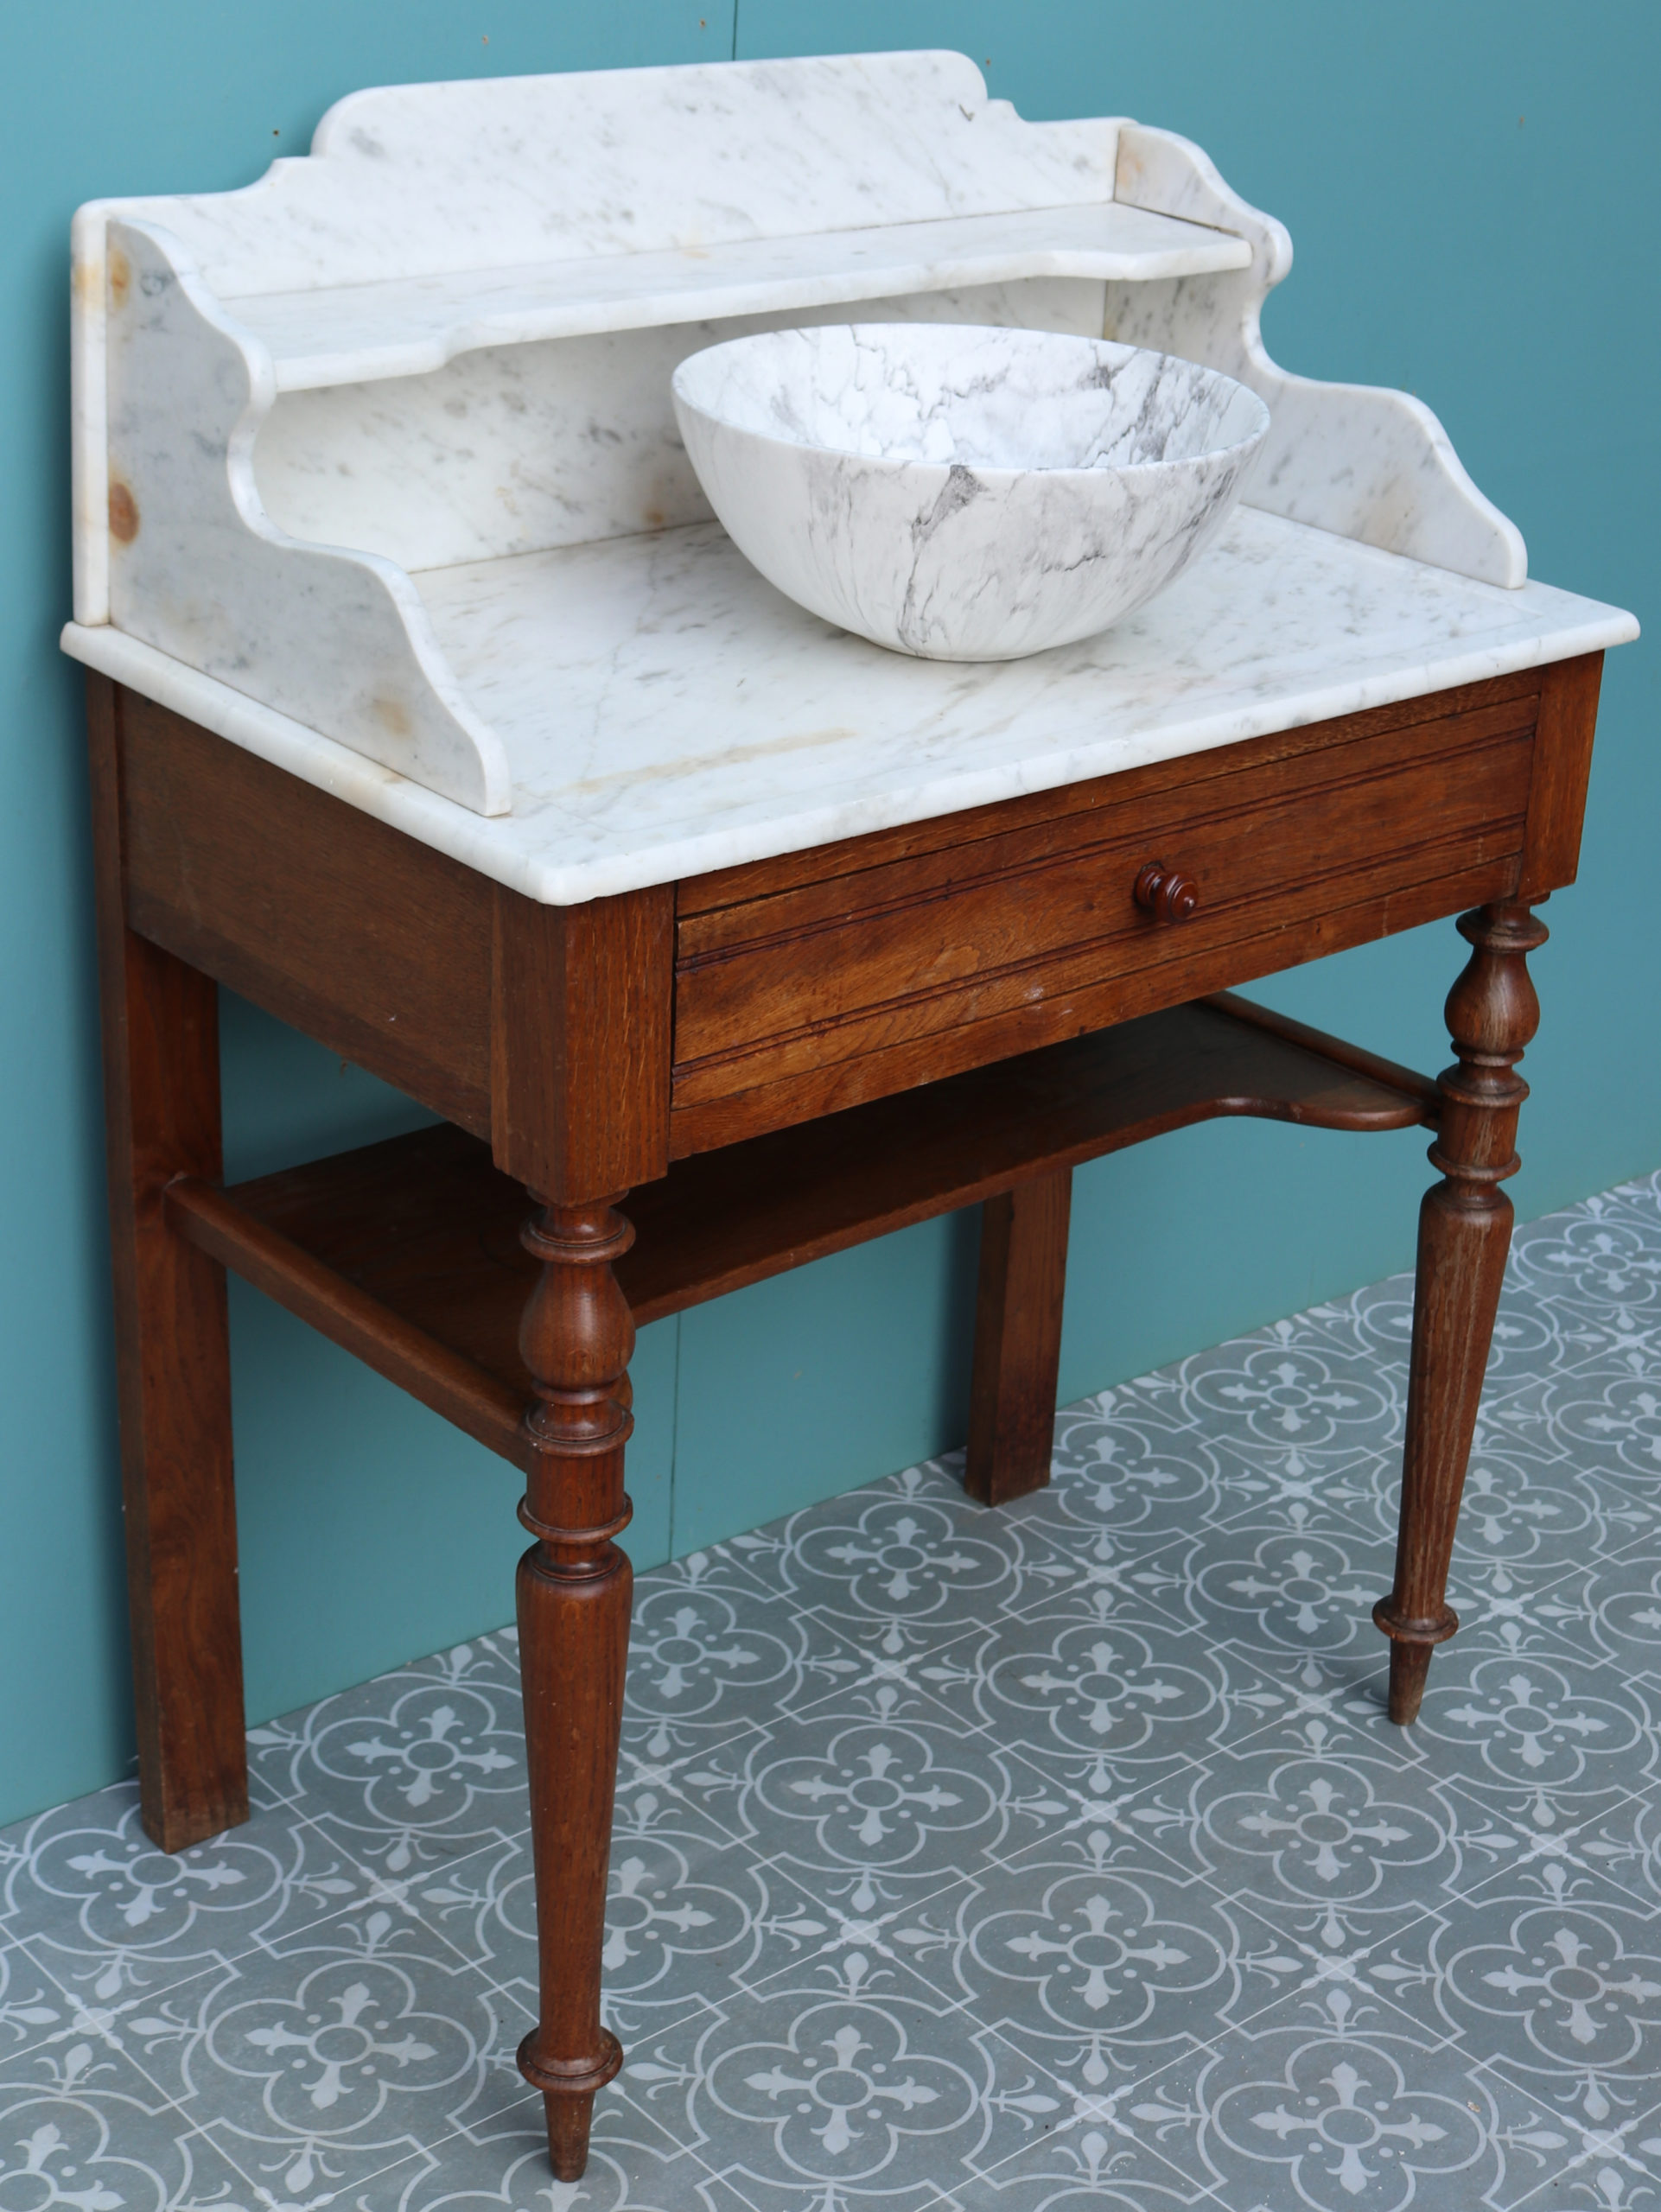 An Antique Marble and Oak Wash  Stand  with Basin  UK Heritage